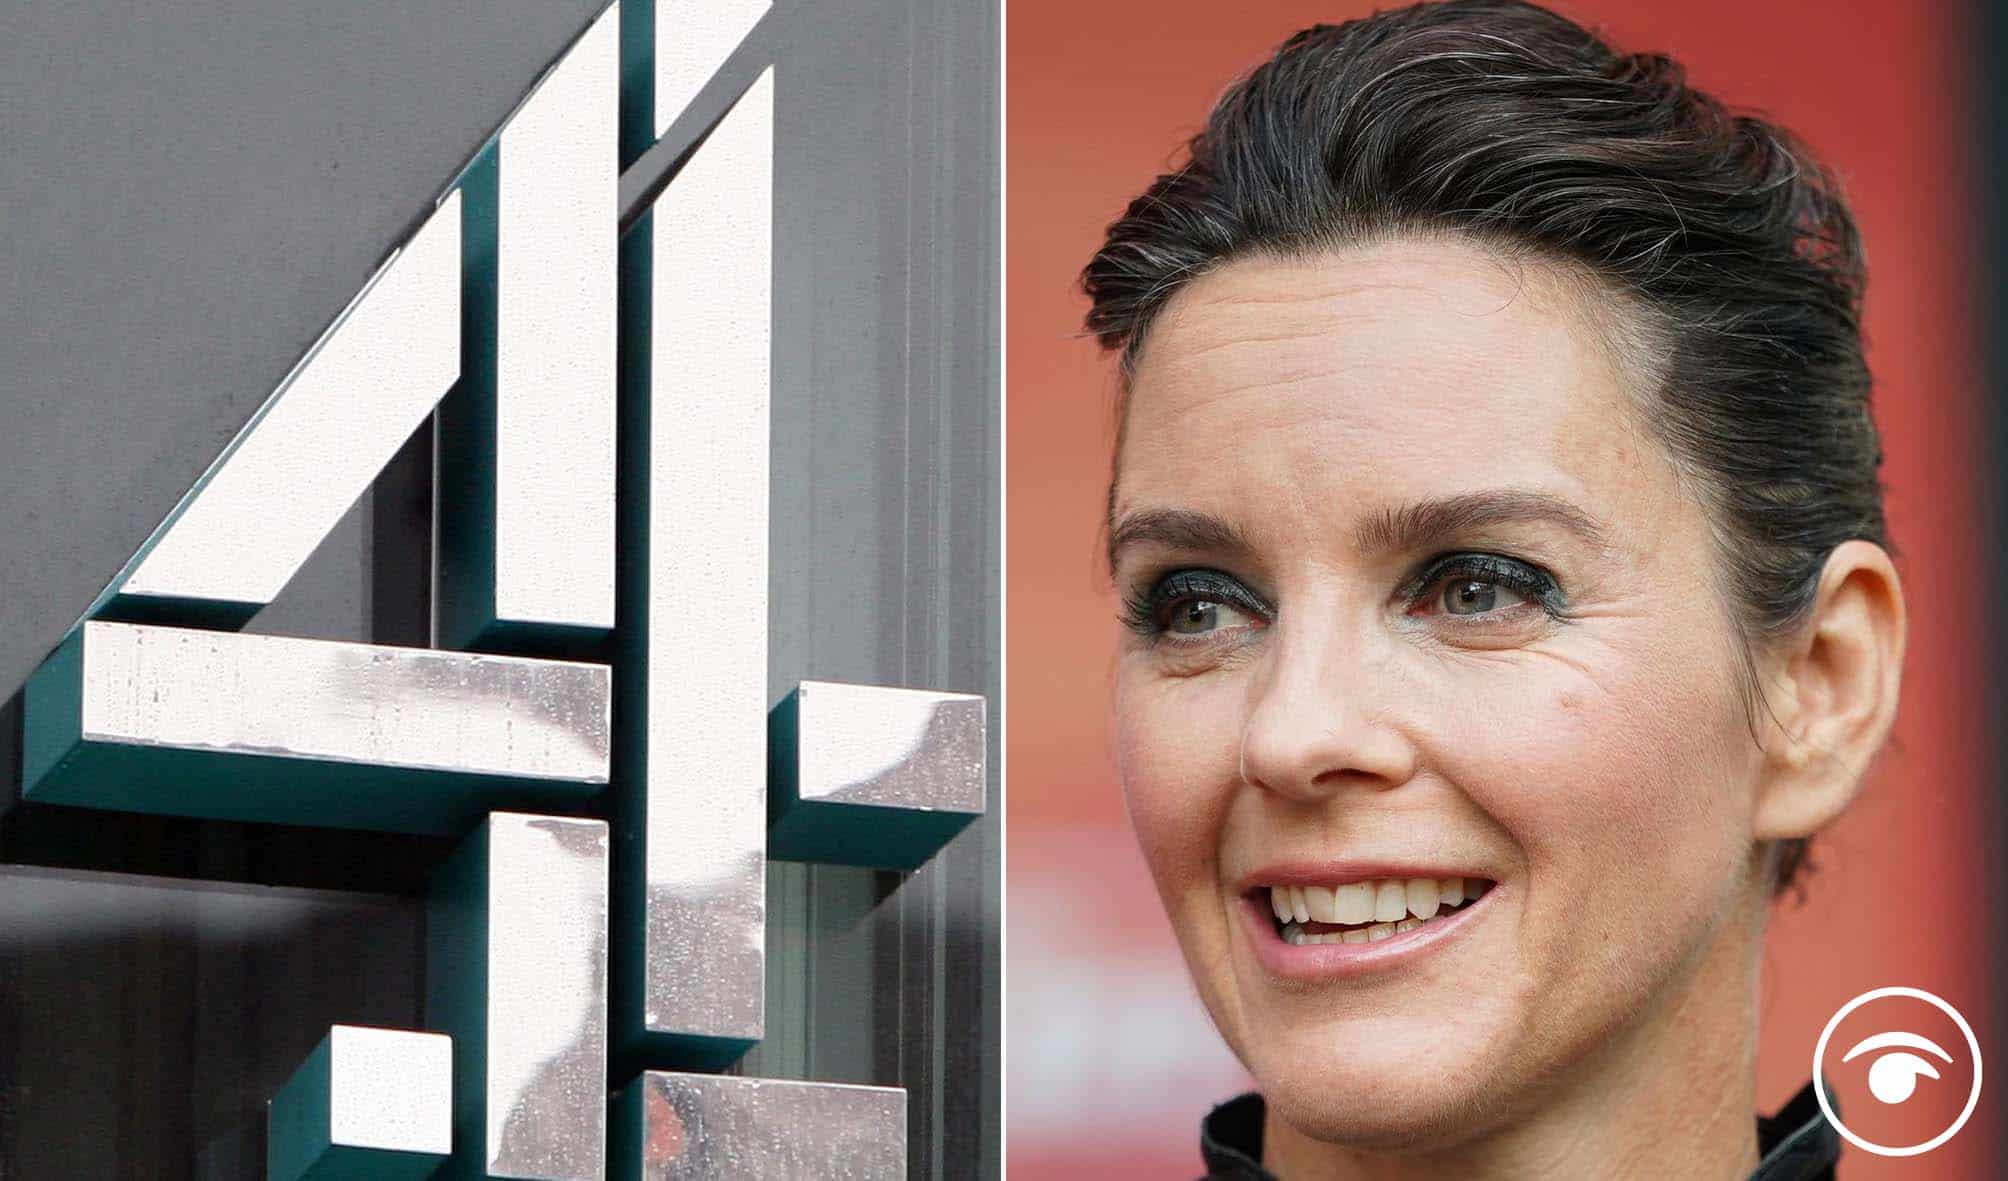 Channel 4 is not left-wing, chief executive says as Govt tries to privatise broadcaster